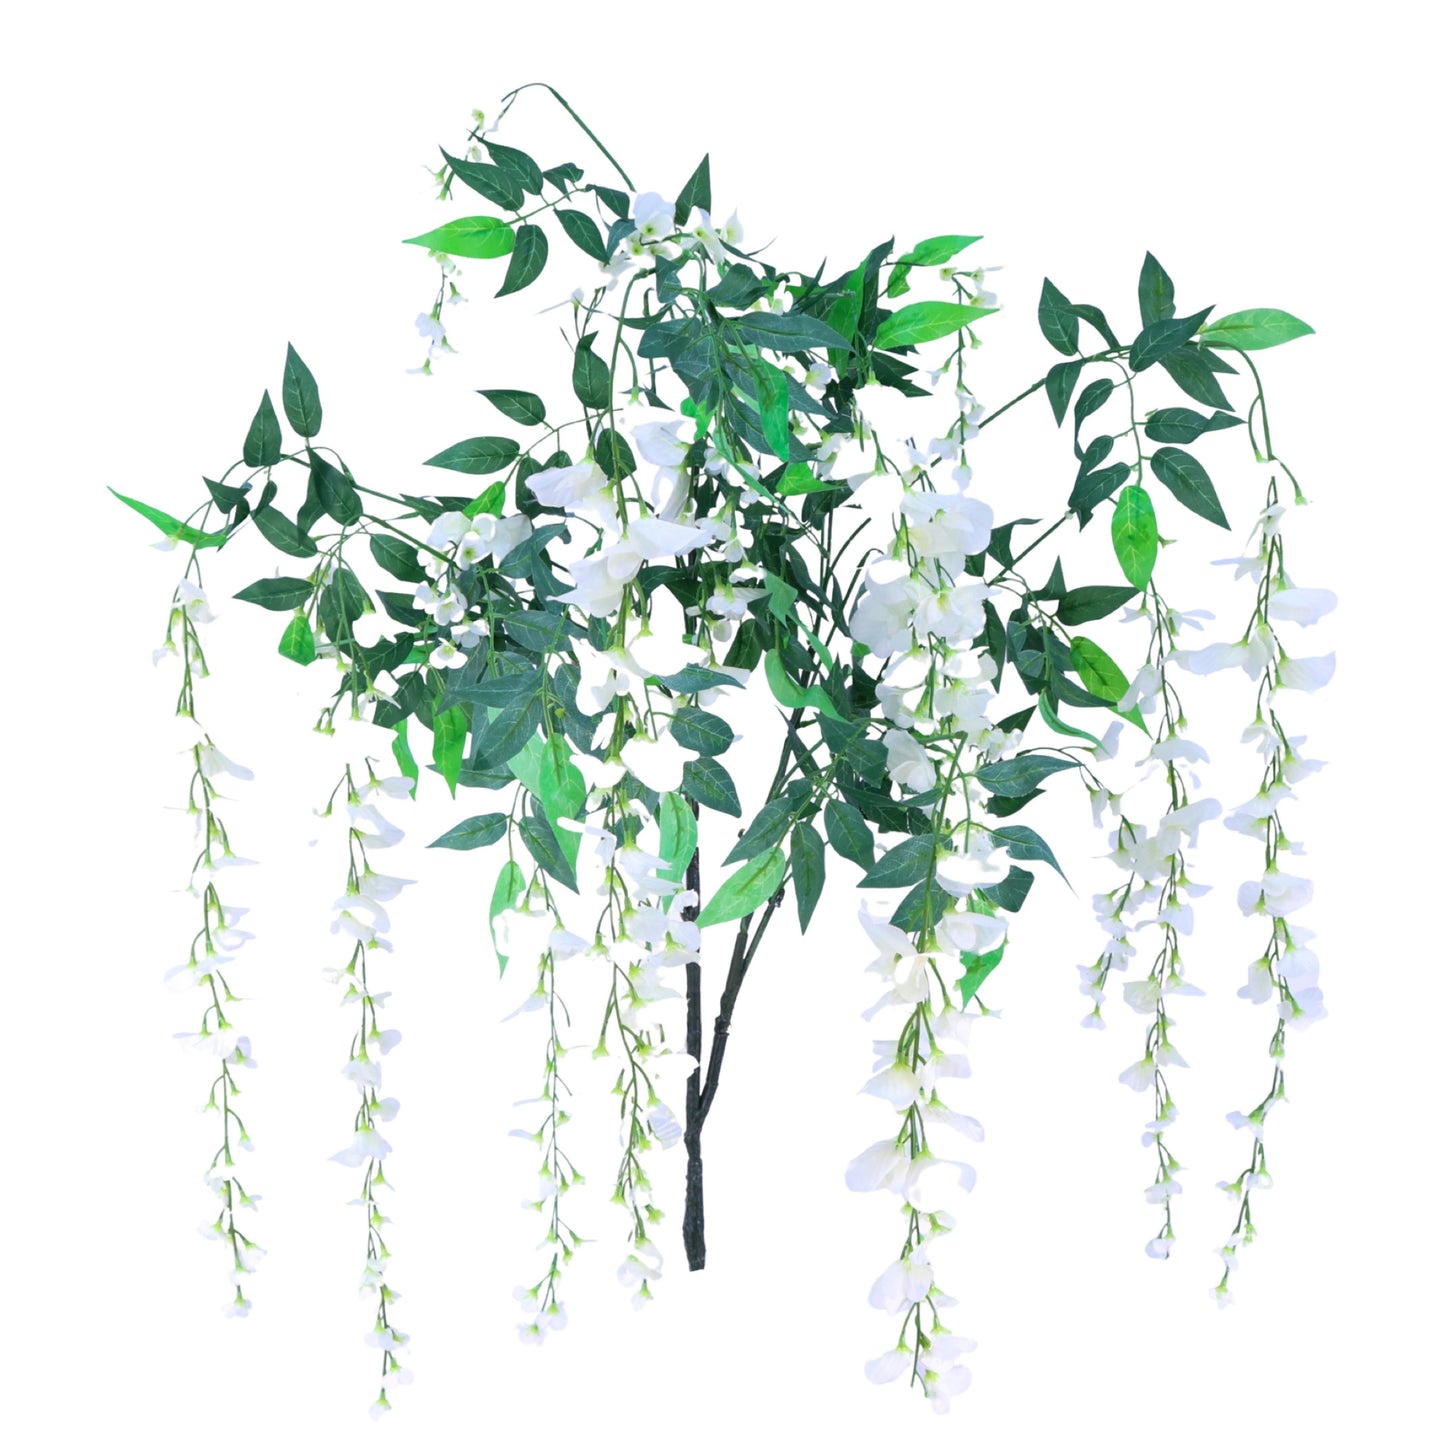 SY10663 WISTERIA TREE BRANCH,58in